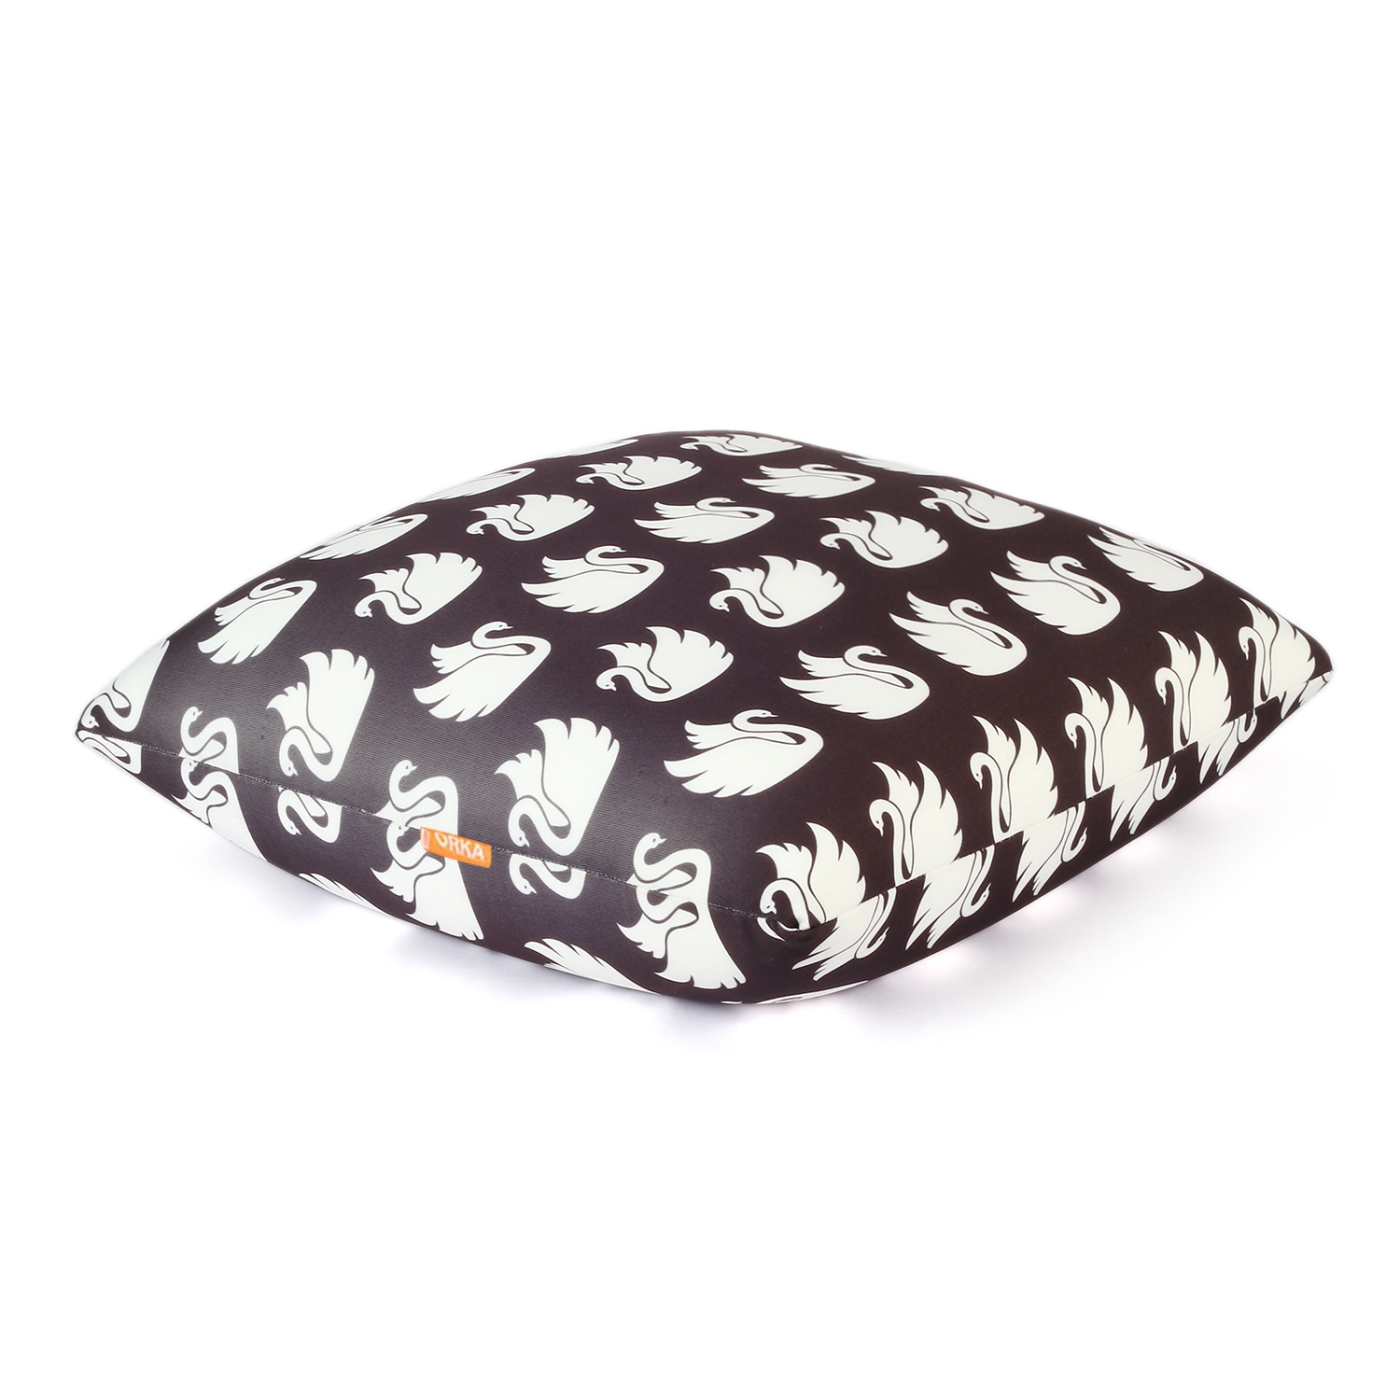 ORKA Digital Printed Spandex Filled With Microbeads Square Cushion 14 X 14 Inch - Black, White  